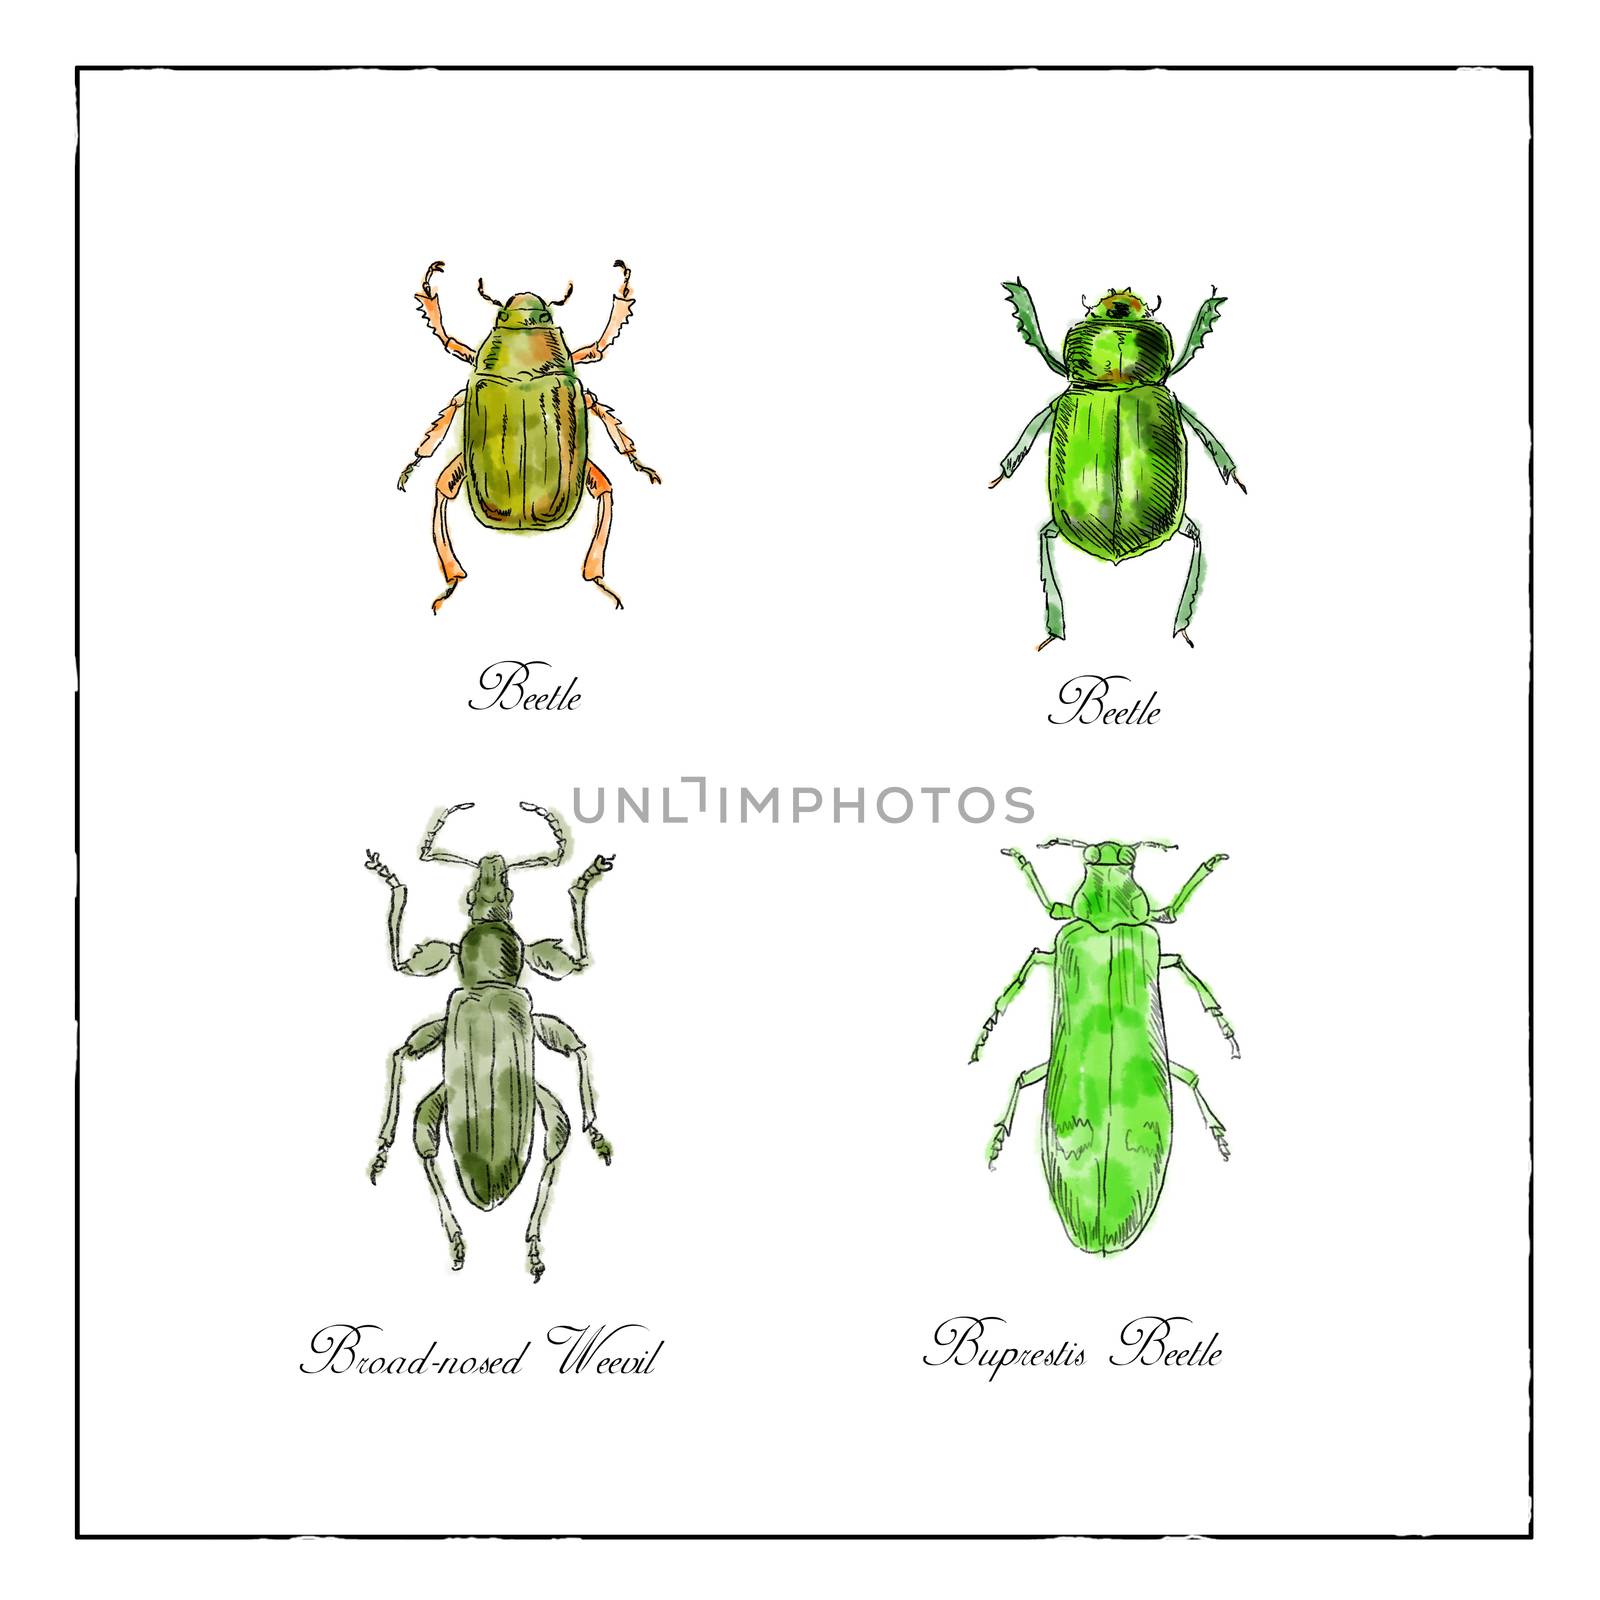 Beetle, Broad-Nosed Weevil and Buprestis Beetle Vintage Collection by patrimonio